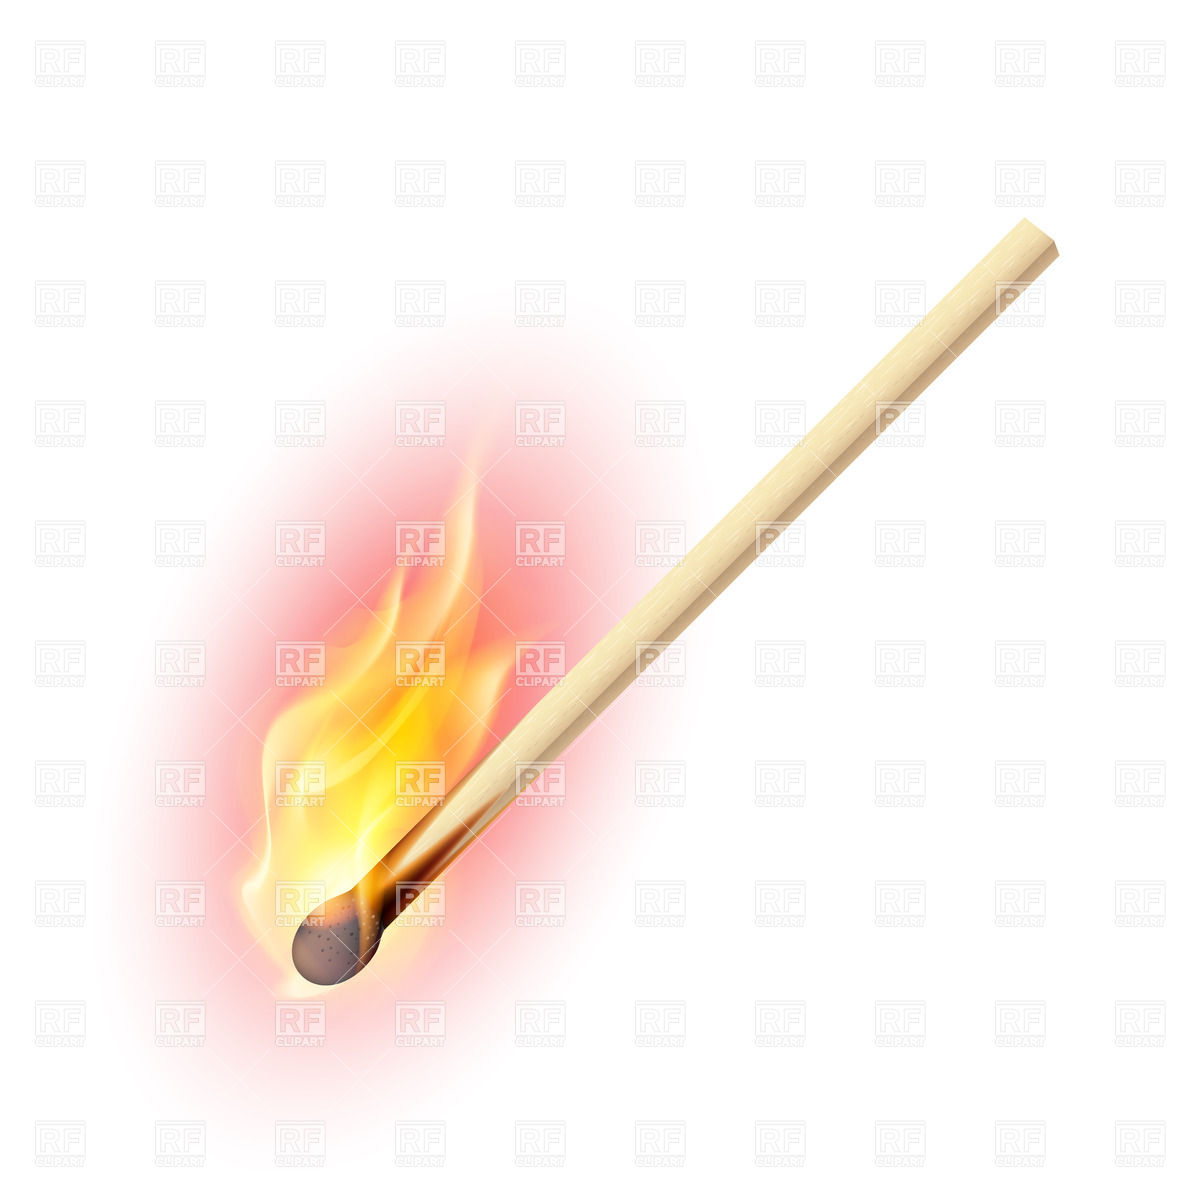 Realistic Burning Match Download Royalty Free Vector Clipart  Eps